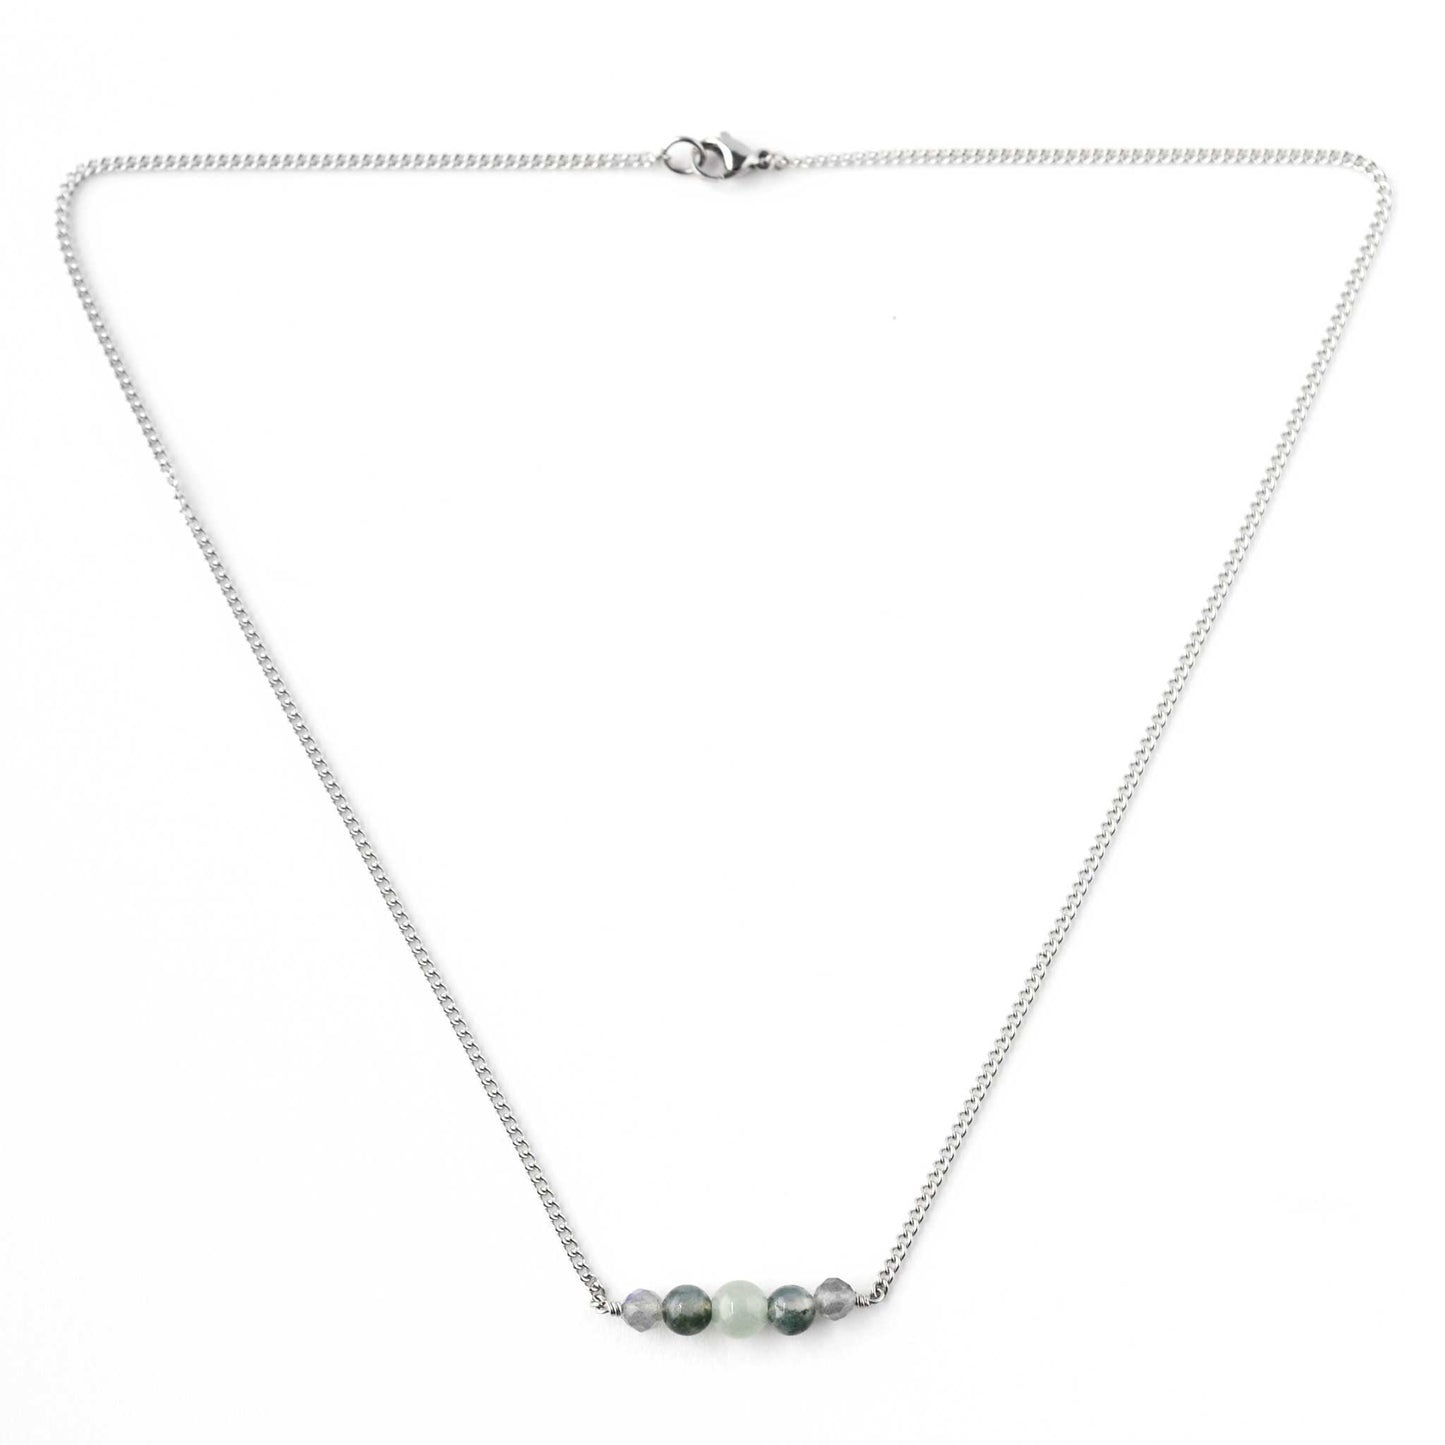 Flatlay of dainty green gemstone necklace with stainless steel chain and lobster clasp